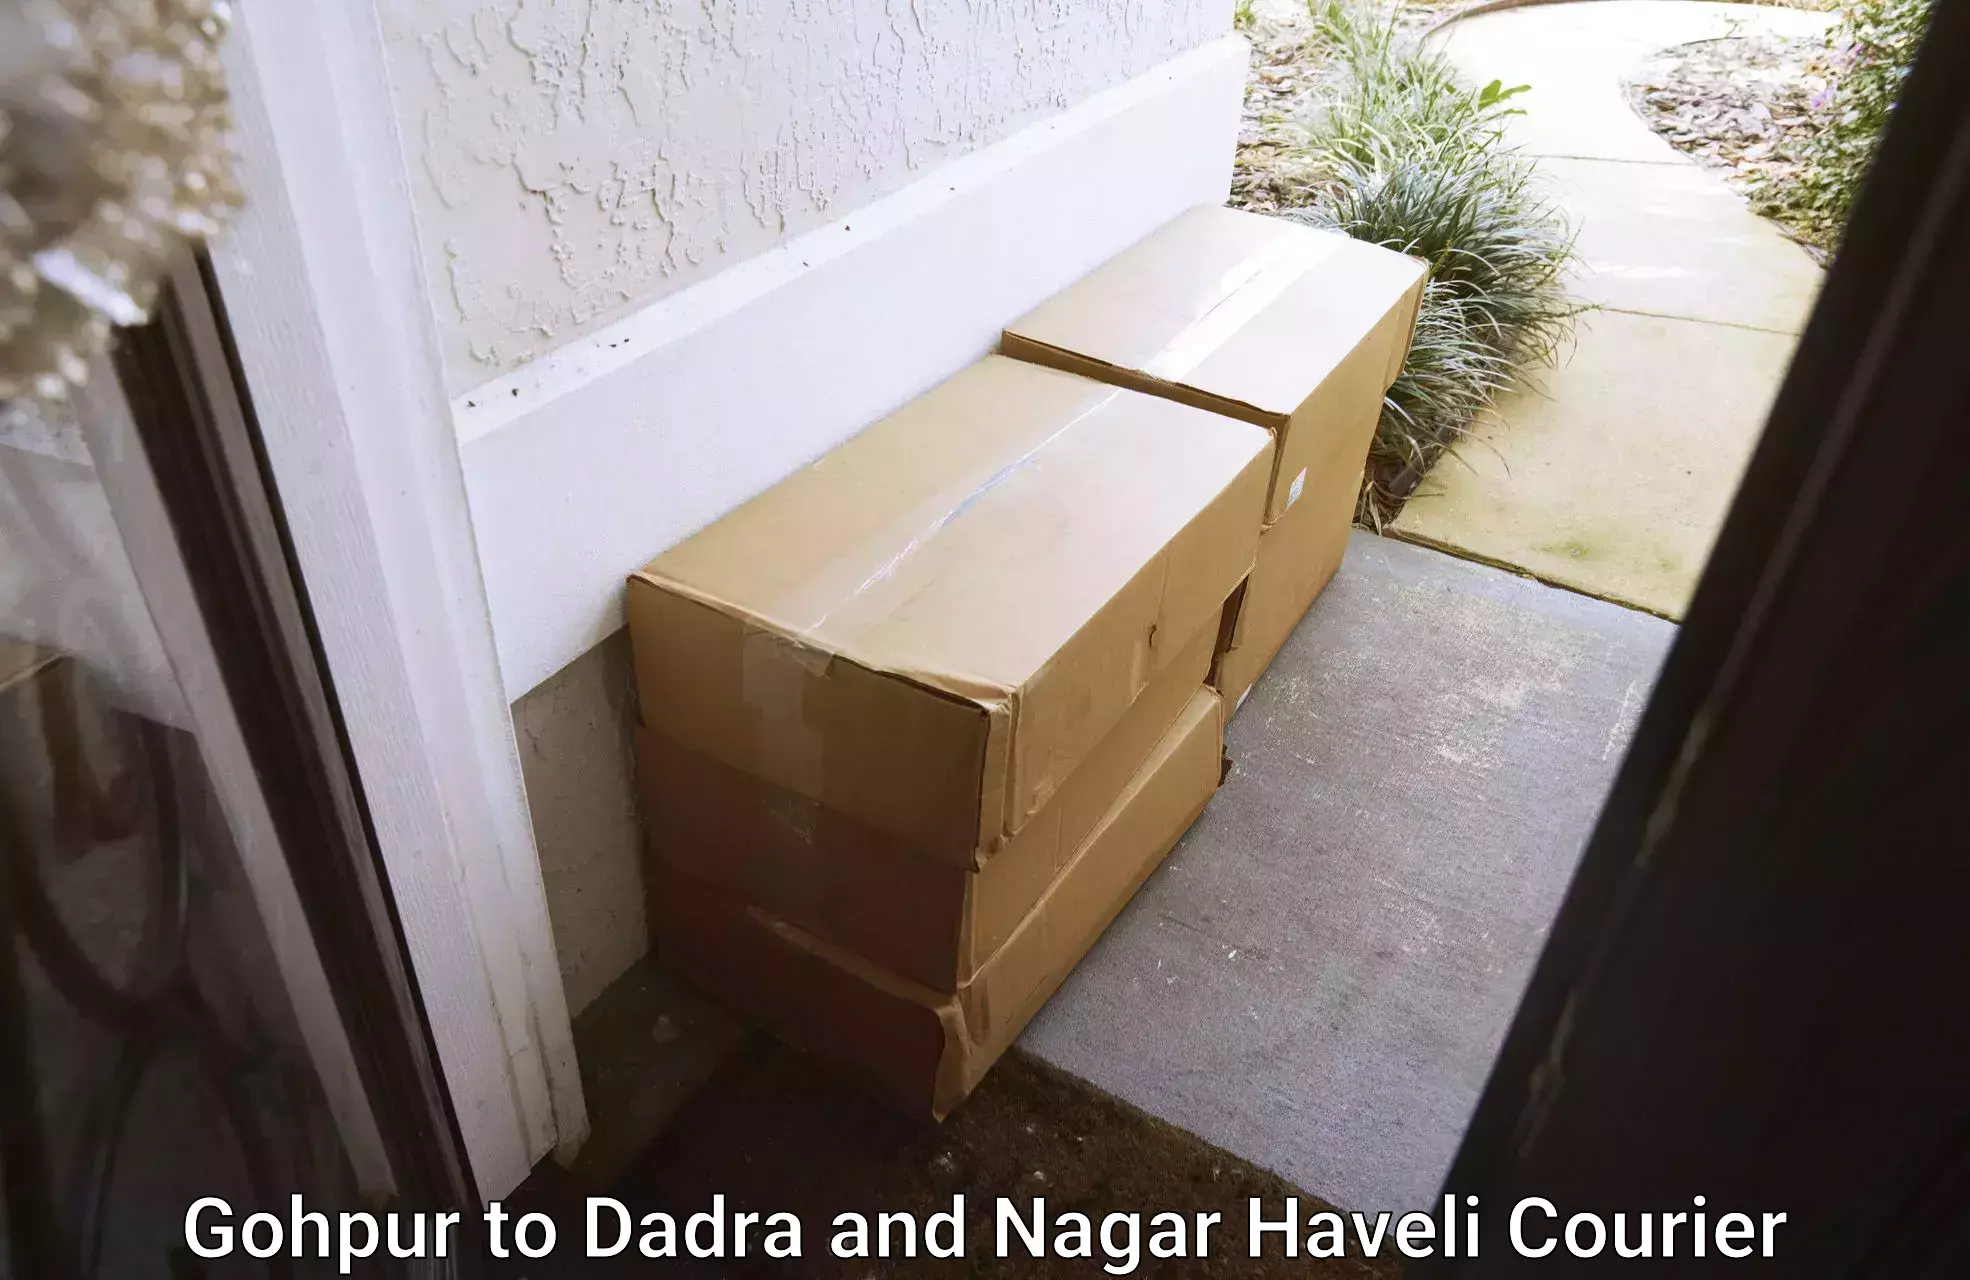 Tailored freight services Gohpur to Dadra and Nagar Haveli